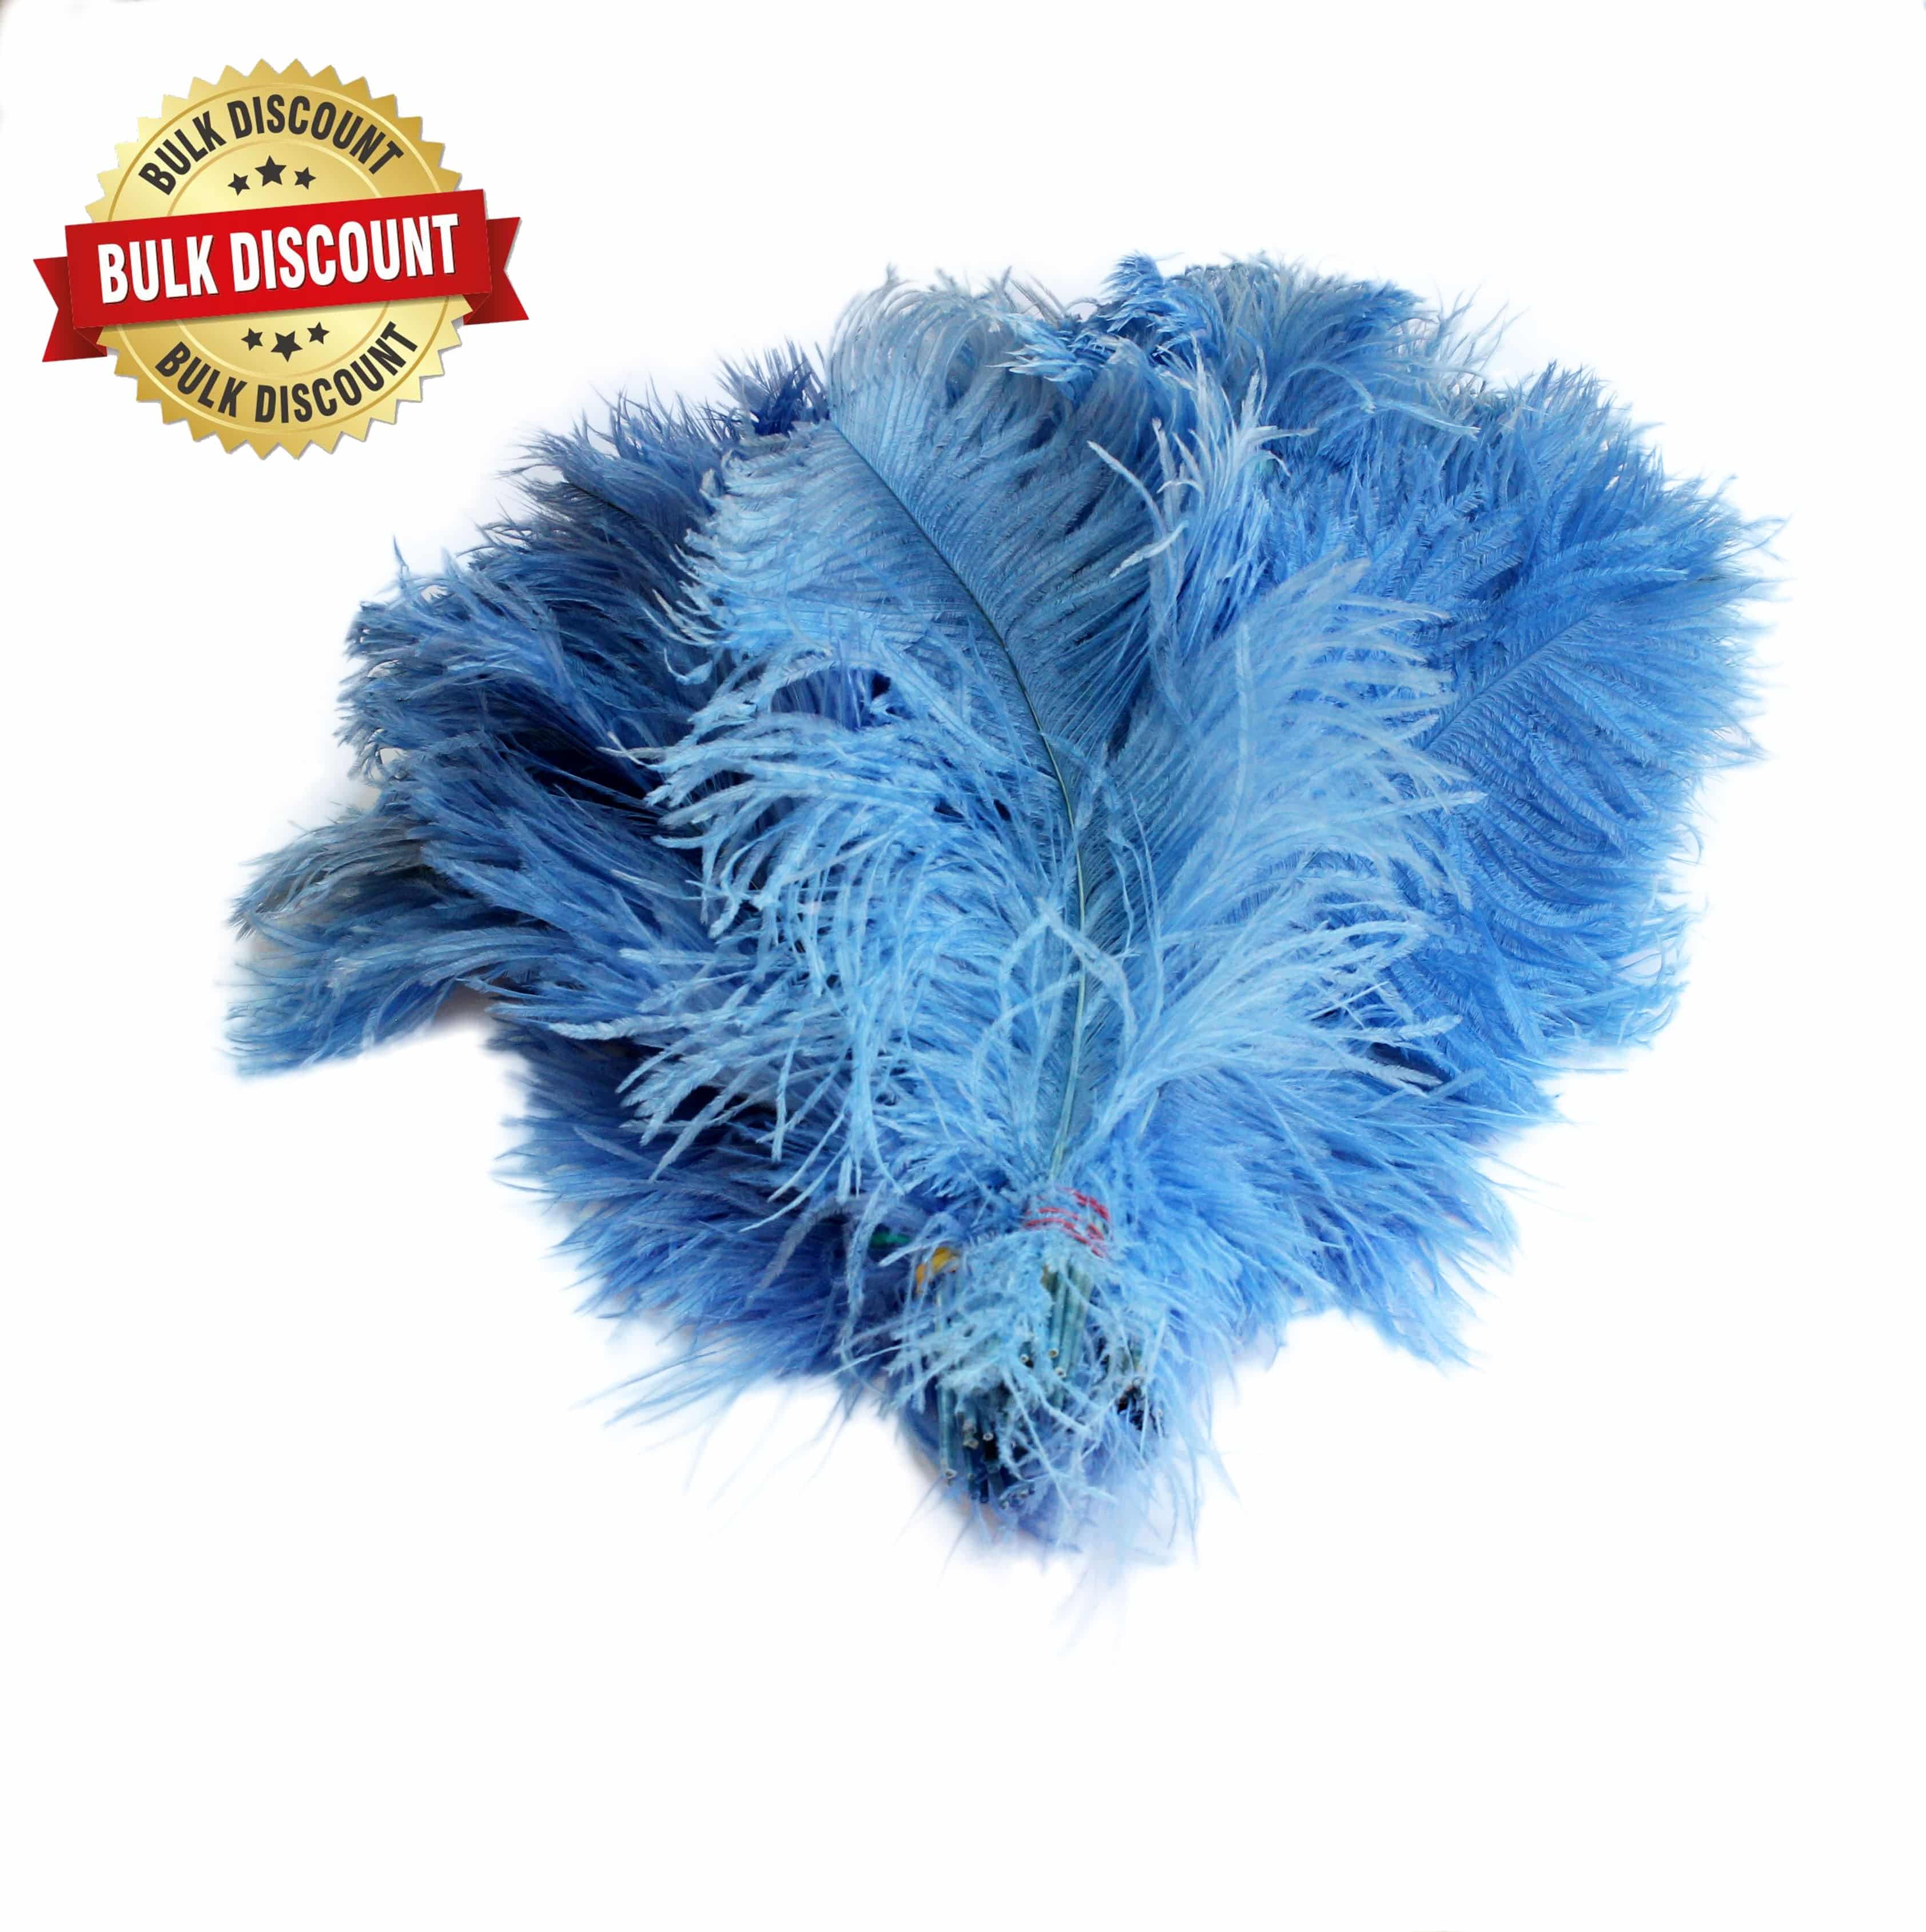 Bulk Special BLACK Ostrich Feathers Centerpiece Tail Feathers.  Approximately 1/2 Lb. of Ostrich Tail Feathers 12-16 Long. 